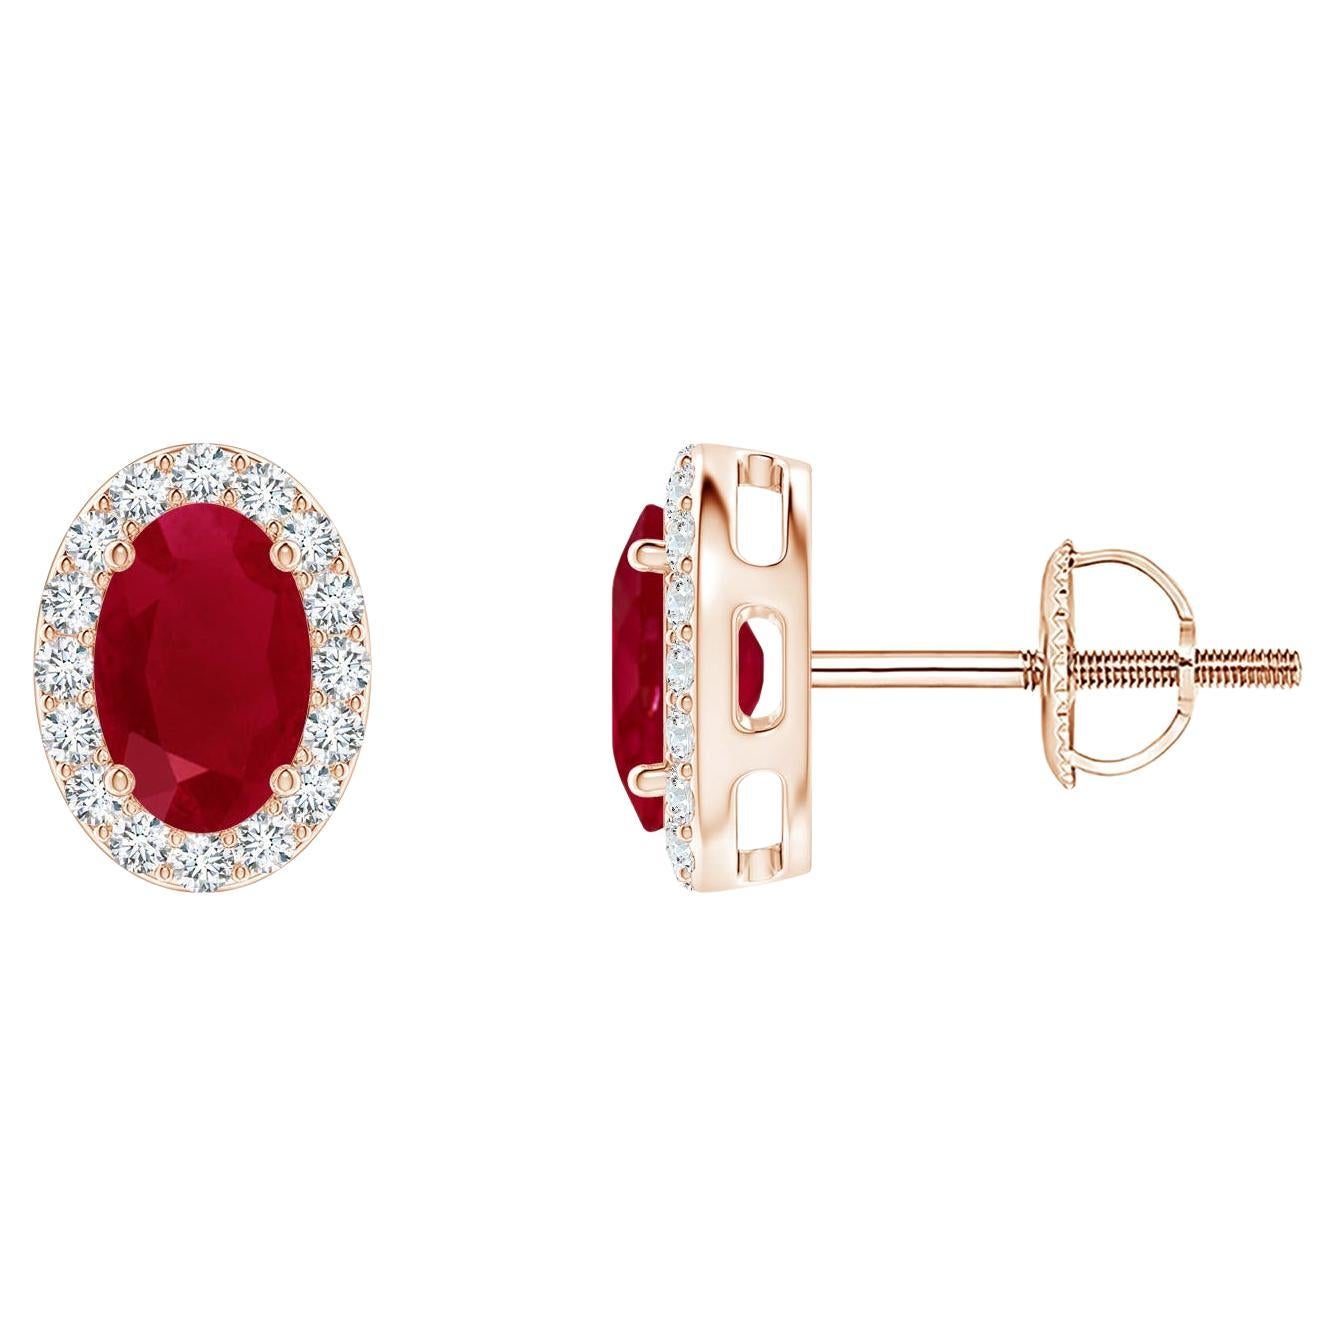 ANGARA Natural Oval 1.20ct Ruby Studs with Diamond Halo in 14K Rose Gold